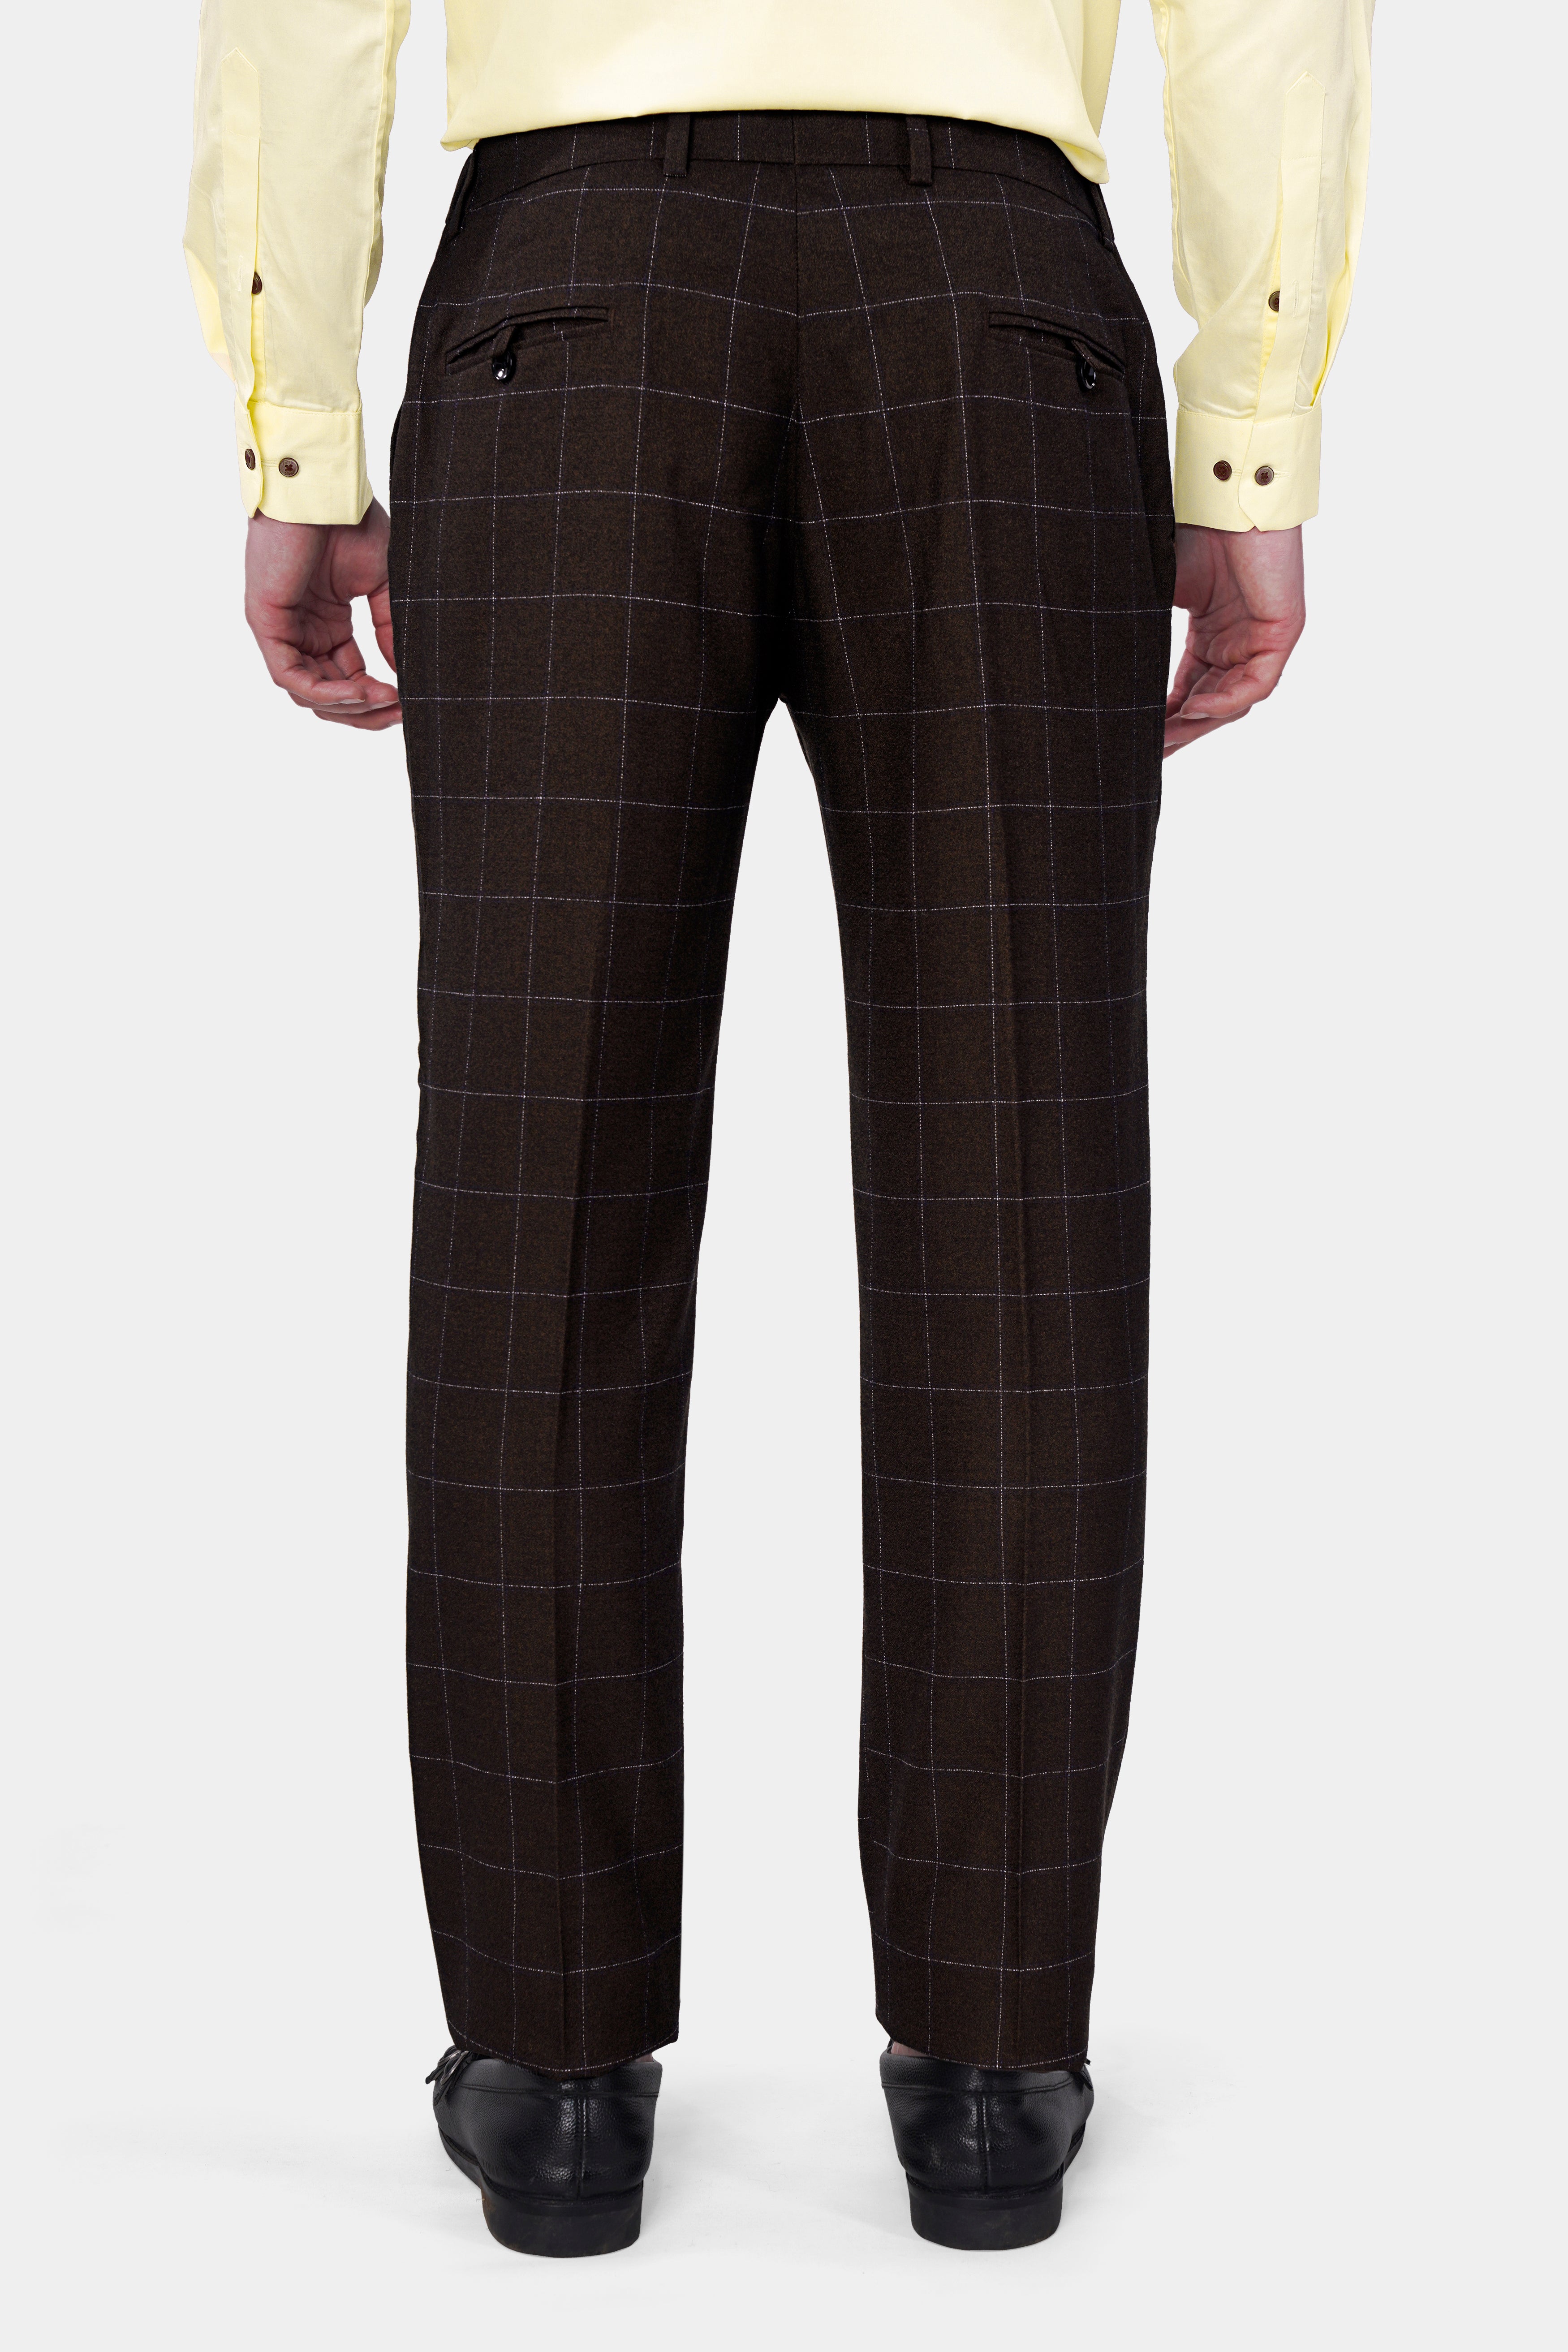 Skinny Fit Twill trousers - Beige/Brown checked - Men | H&M IN